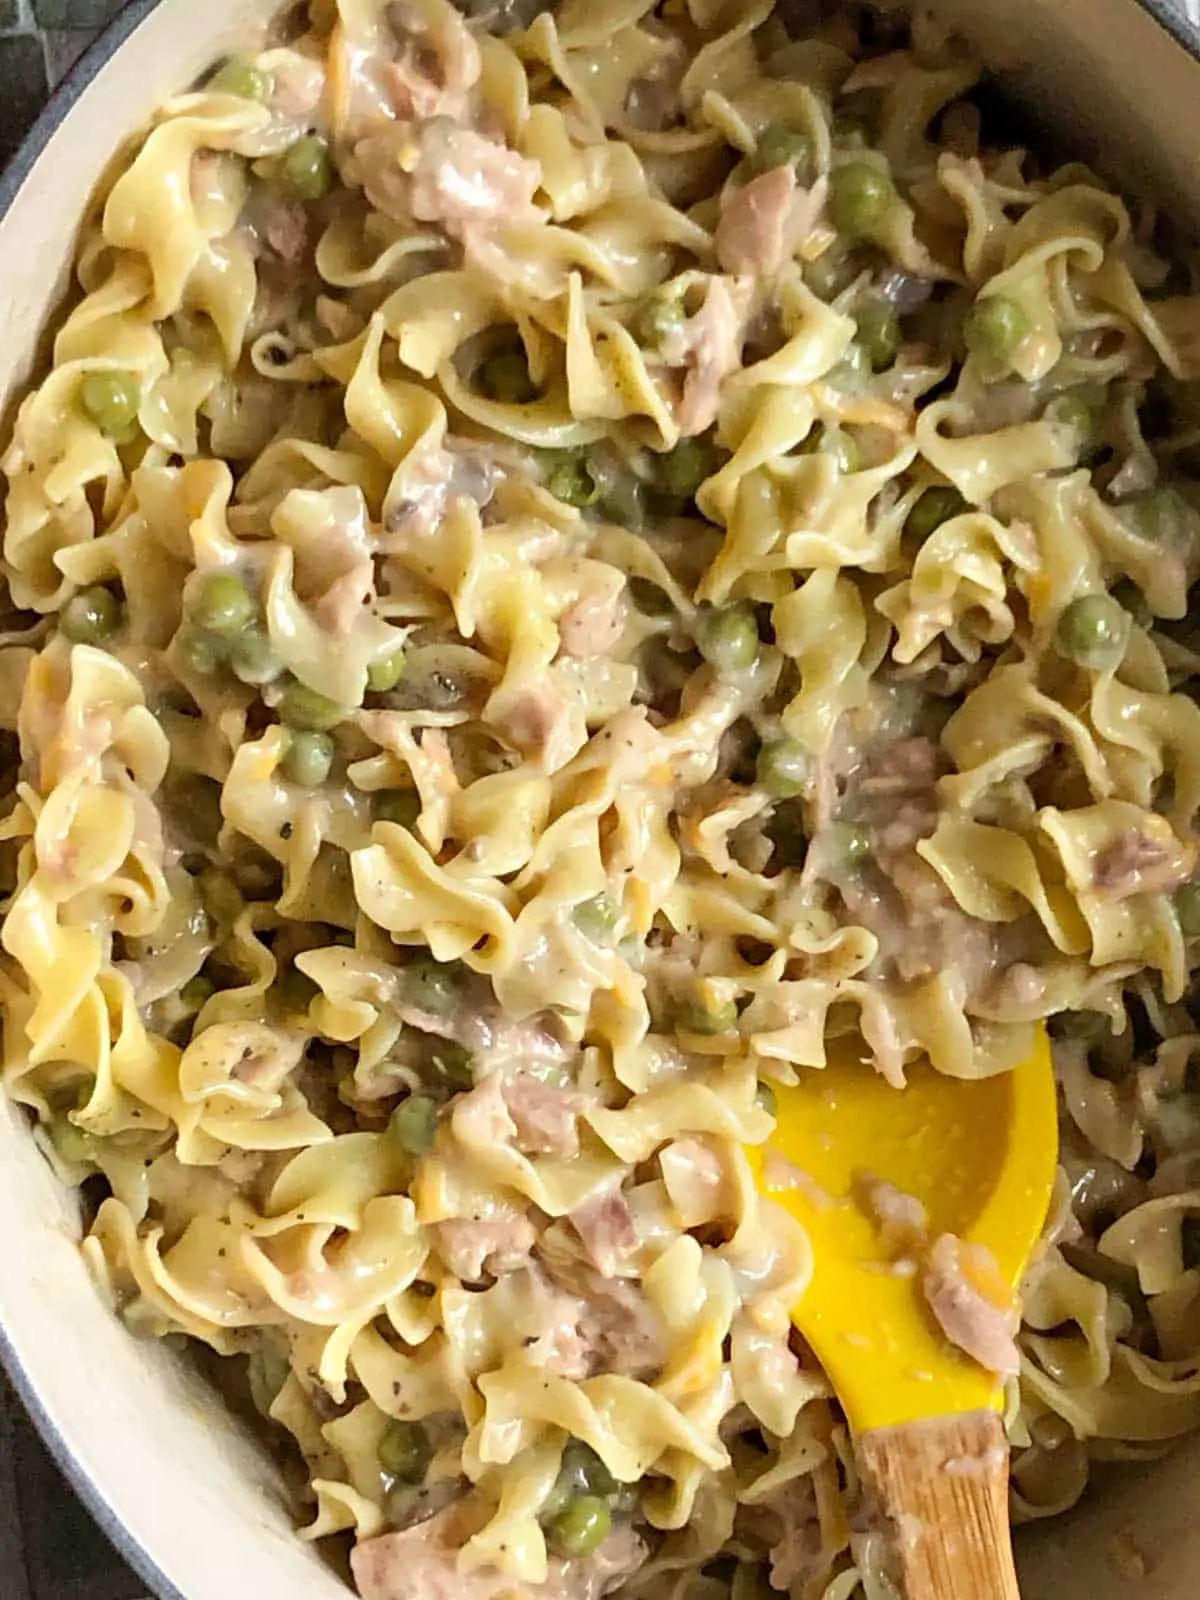 Noodles cooked with tuna and peas in a creamy sauce and a yellow spoon cradling some of the tuna noodle casserole.